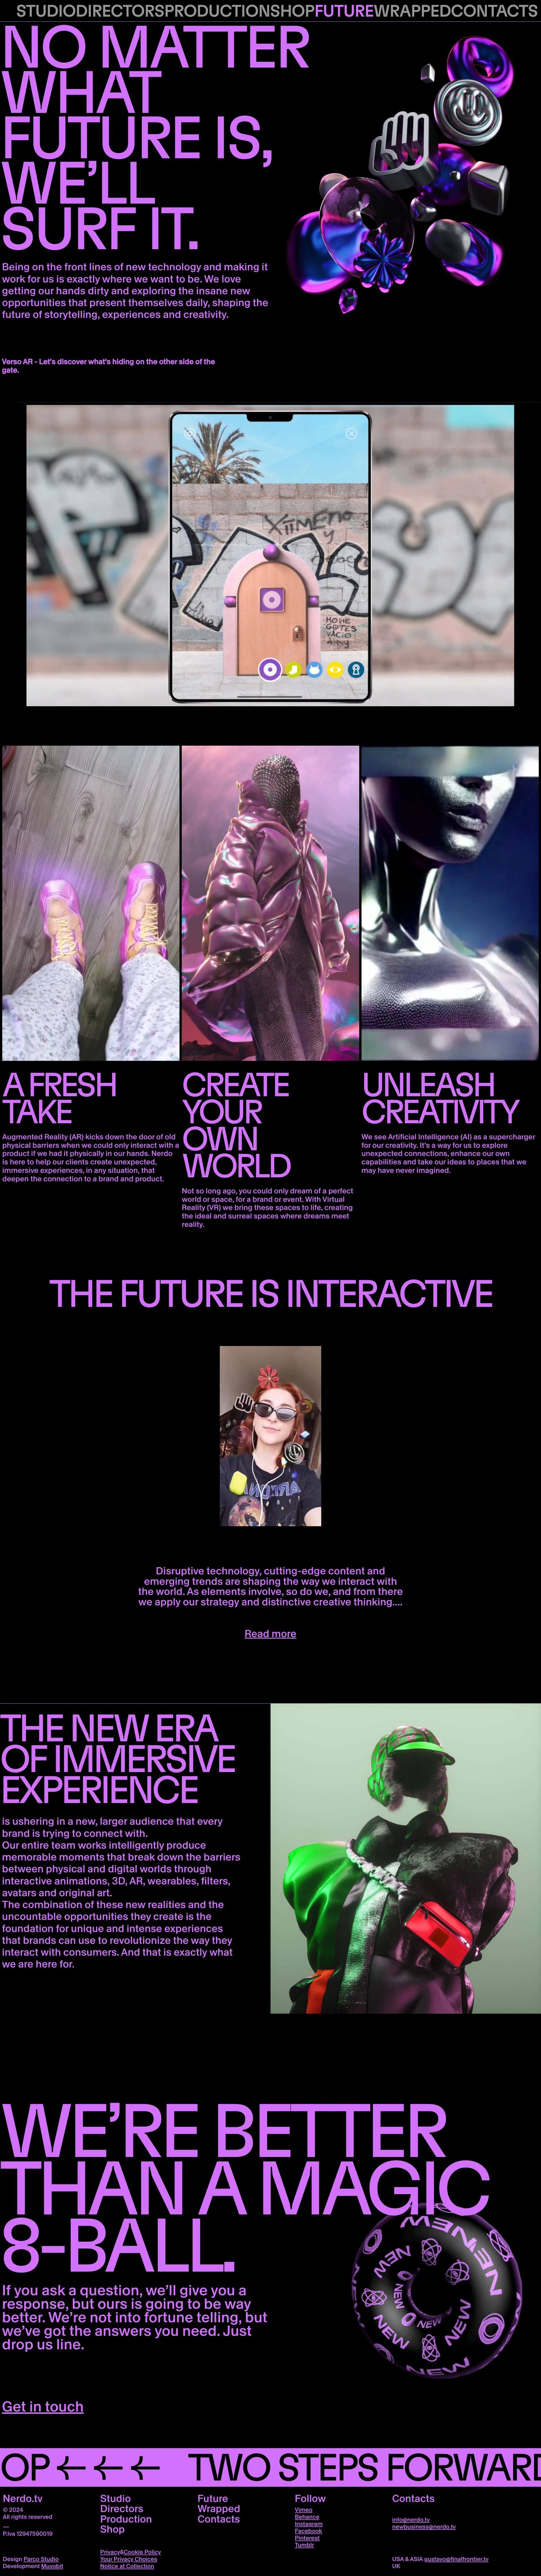 NERDO Landing Page Example: International award-winning creative-driven studio. Making the difference since 2009. Courageous, independent and bat-s**t crazy thinkers.